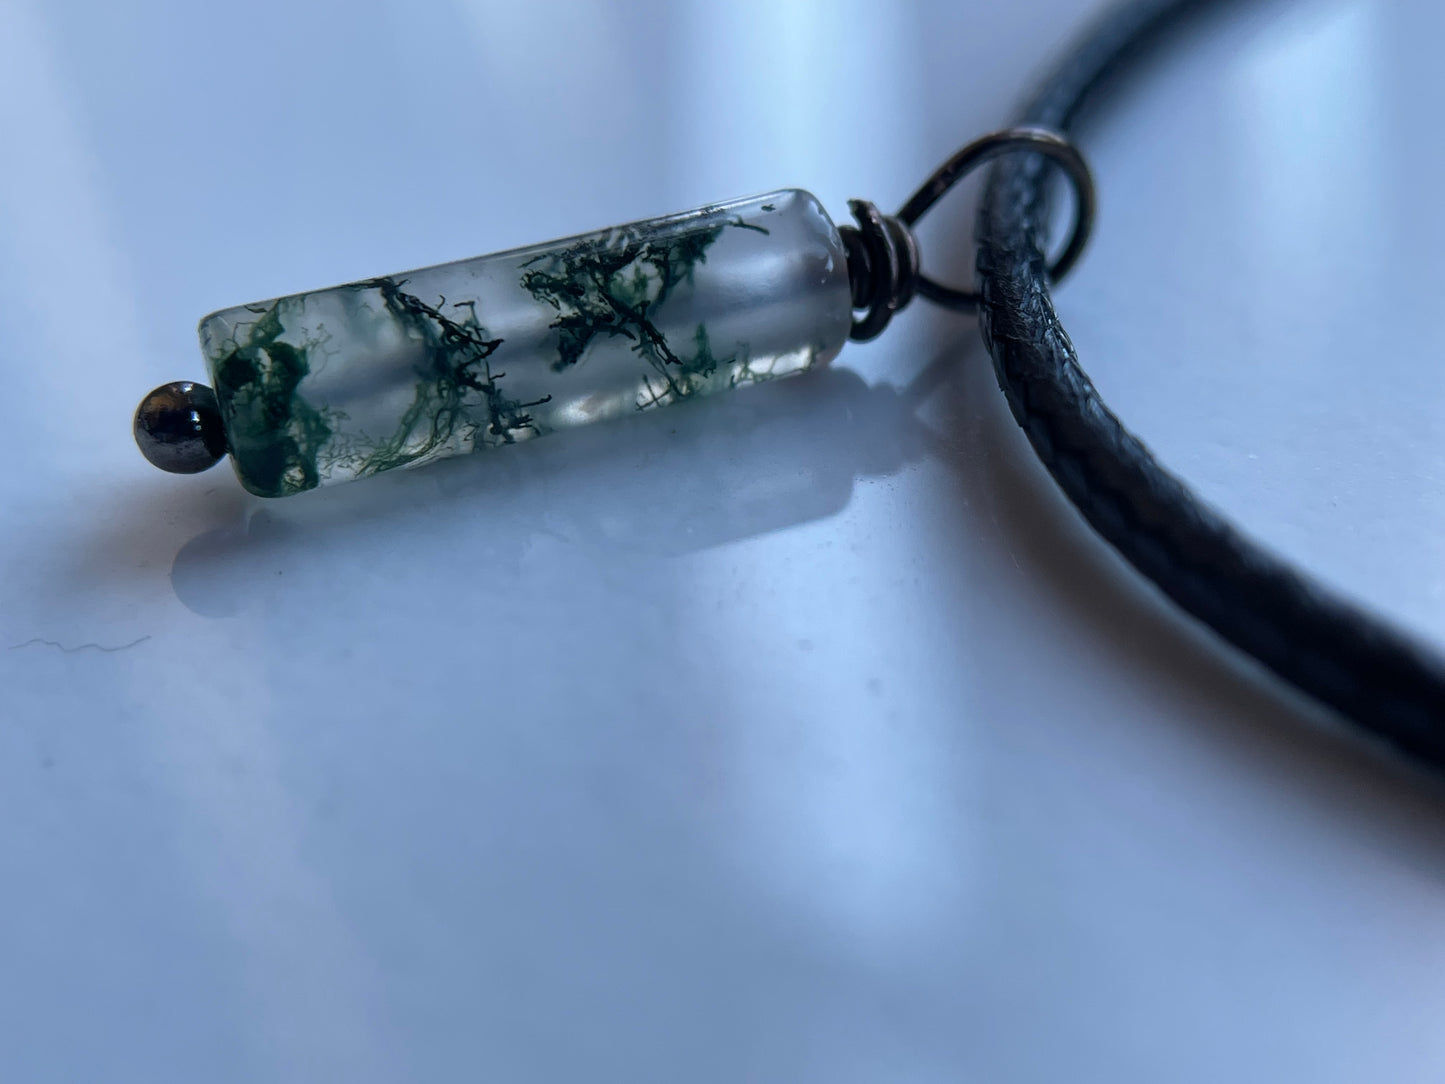 Moss Agate Crystal Gemstone Necklace